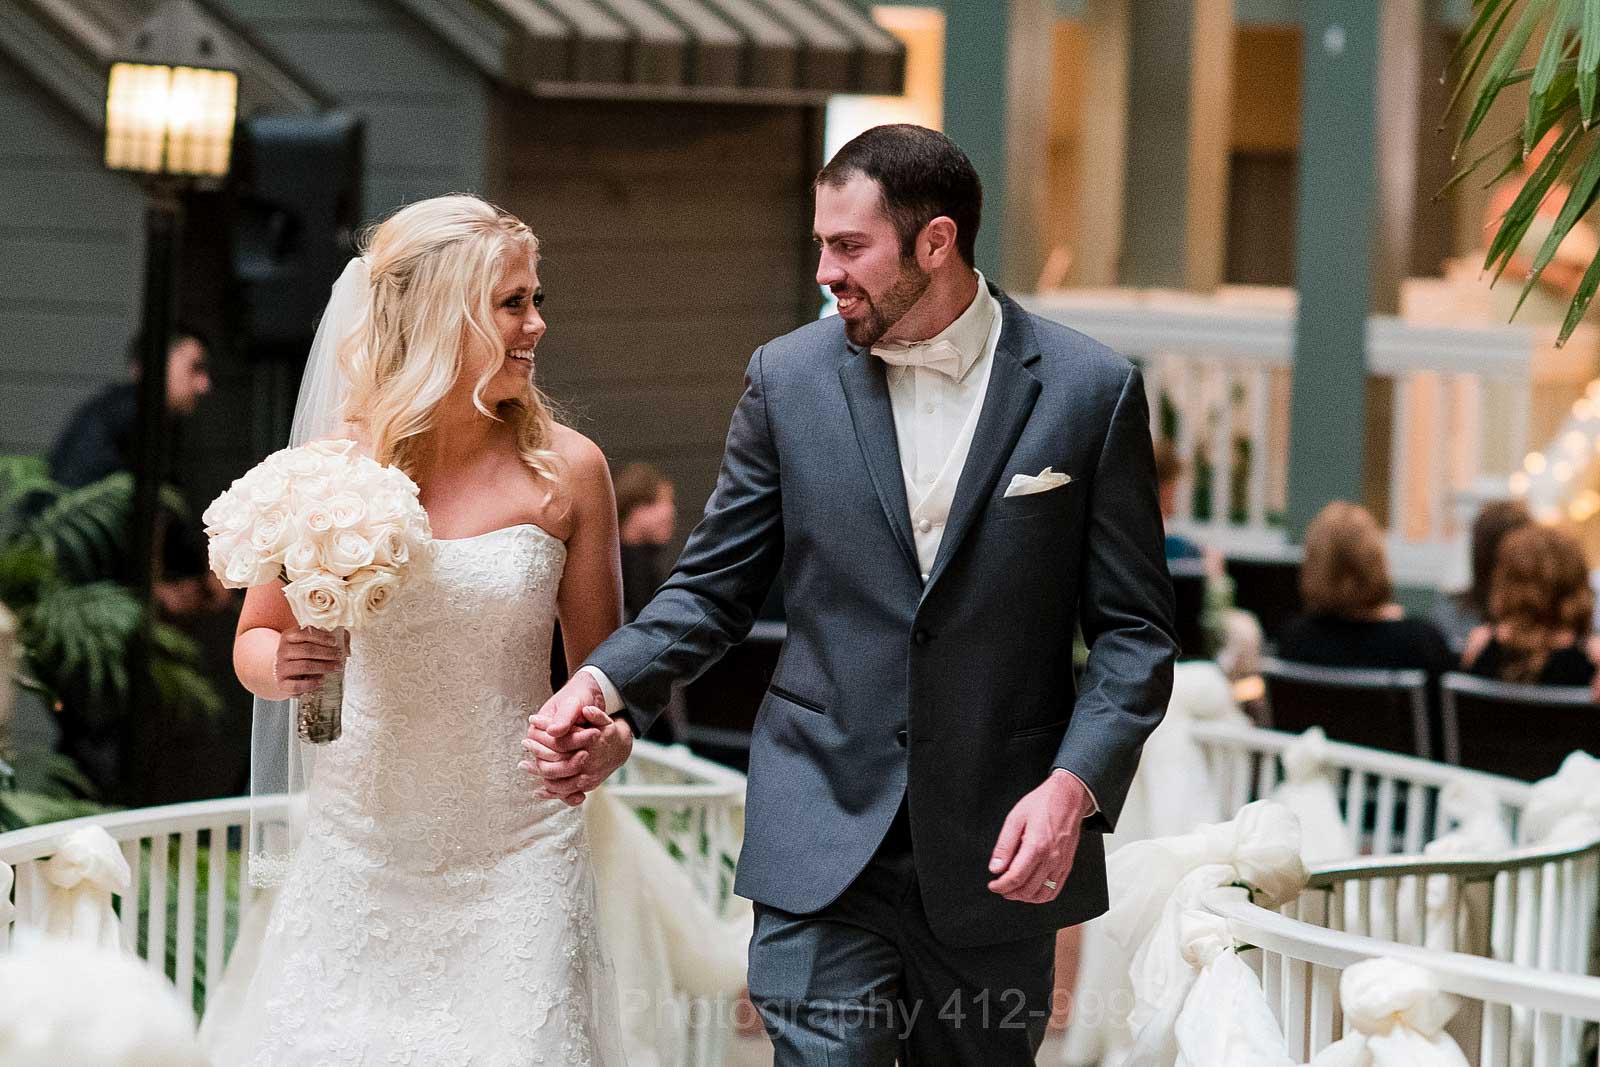 A bride and groom hold hands and smile as they walk along a curved path at the Embassy Suites hotel in Pittsburgh.